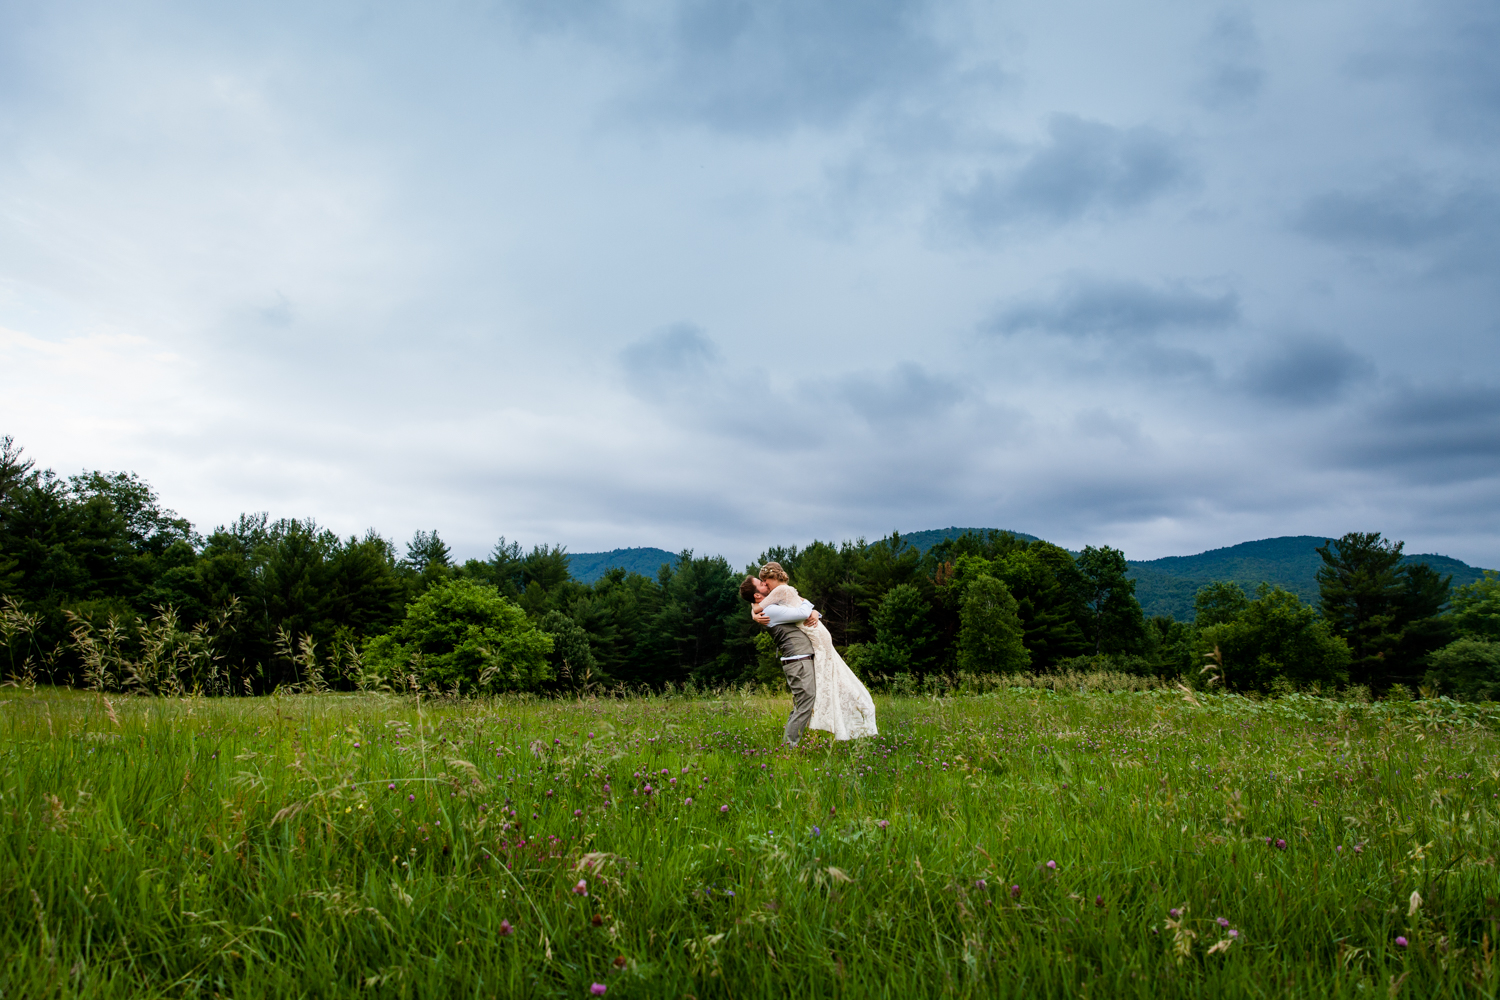  Groom lifts bride in a field in Upstate New York 